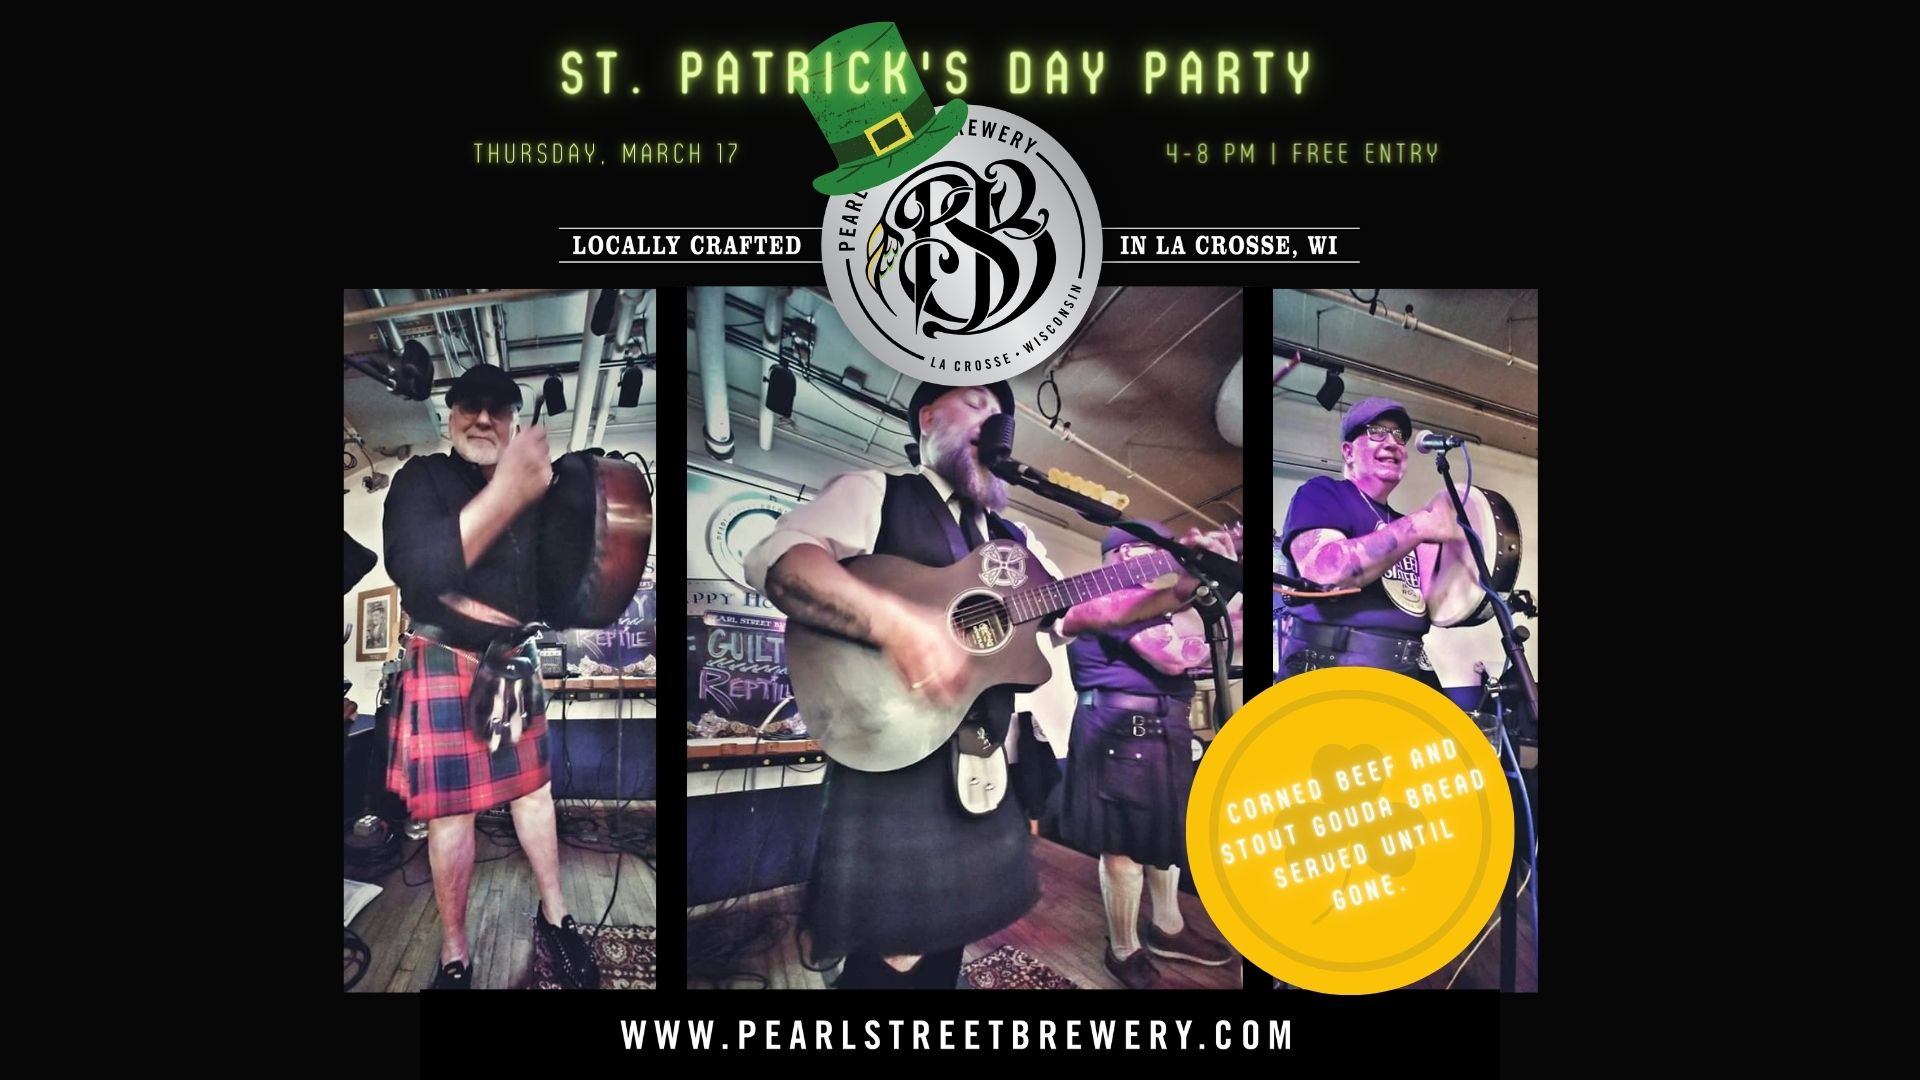 Pearl Street Brewery Annual St. Patrick's Day Party